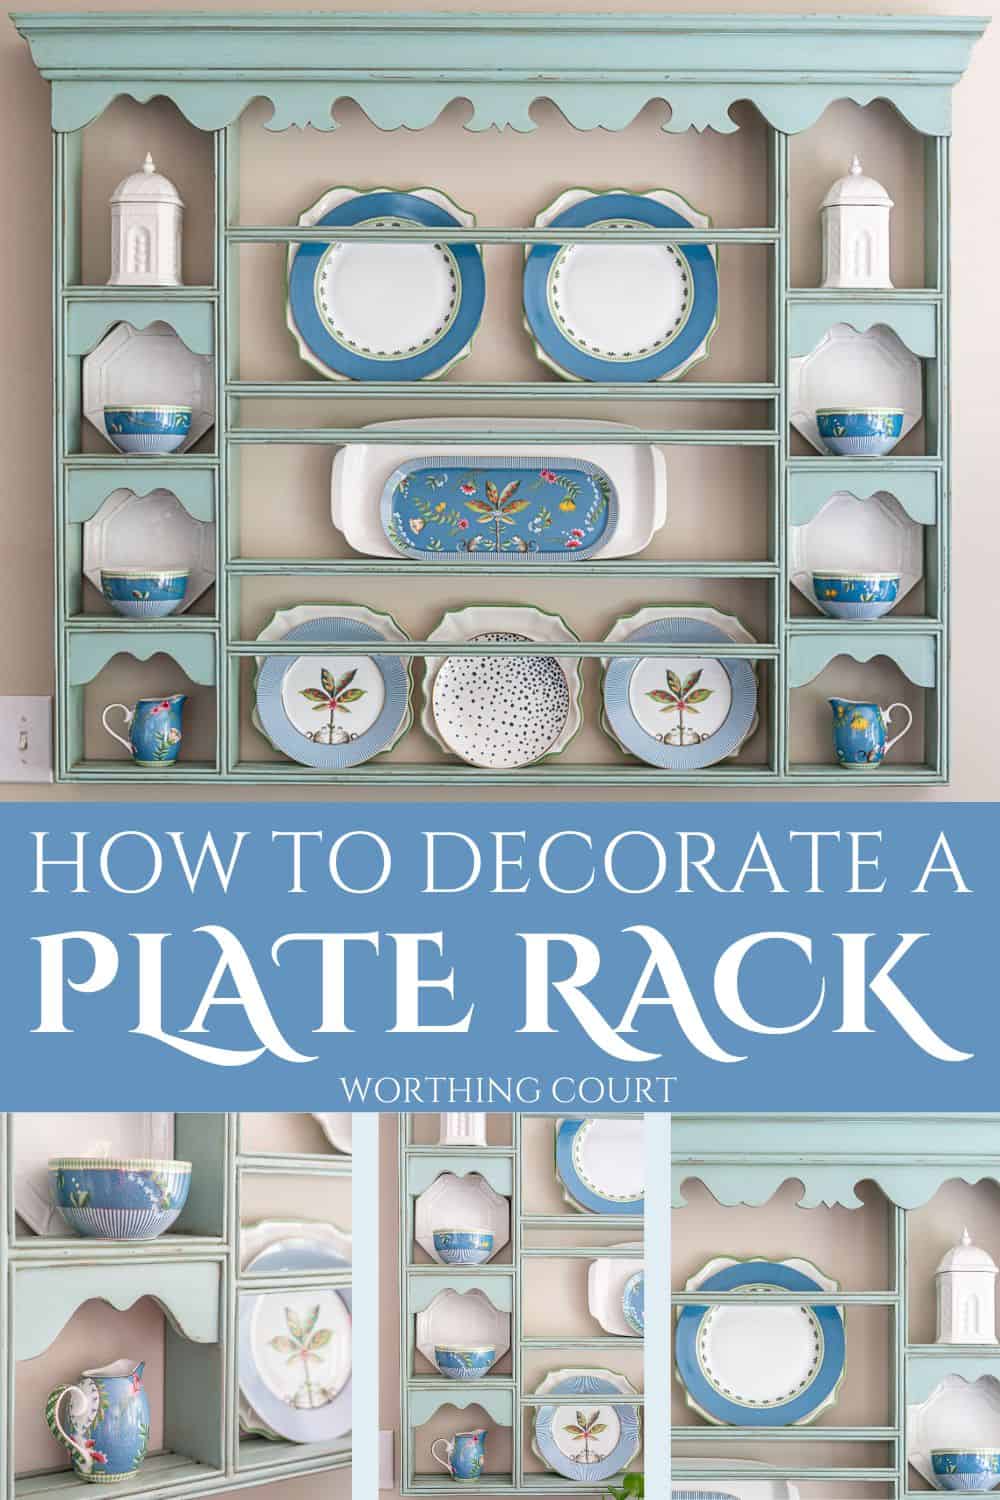 https://www.worthingcourtblog.com/wp-content/uploads/2022/10/how-to-decorate-a-plate-display-rack-18.jpg